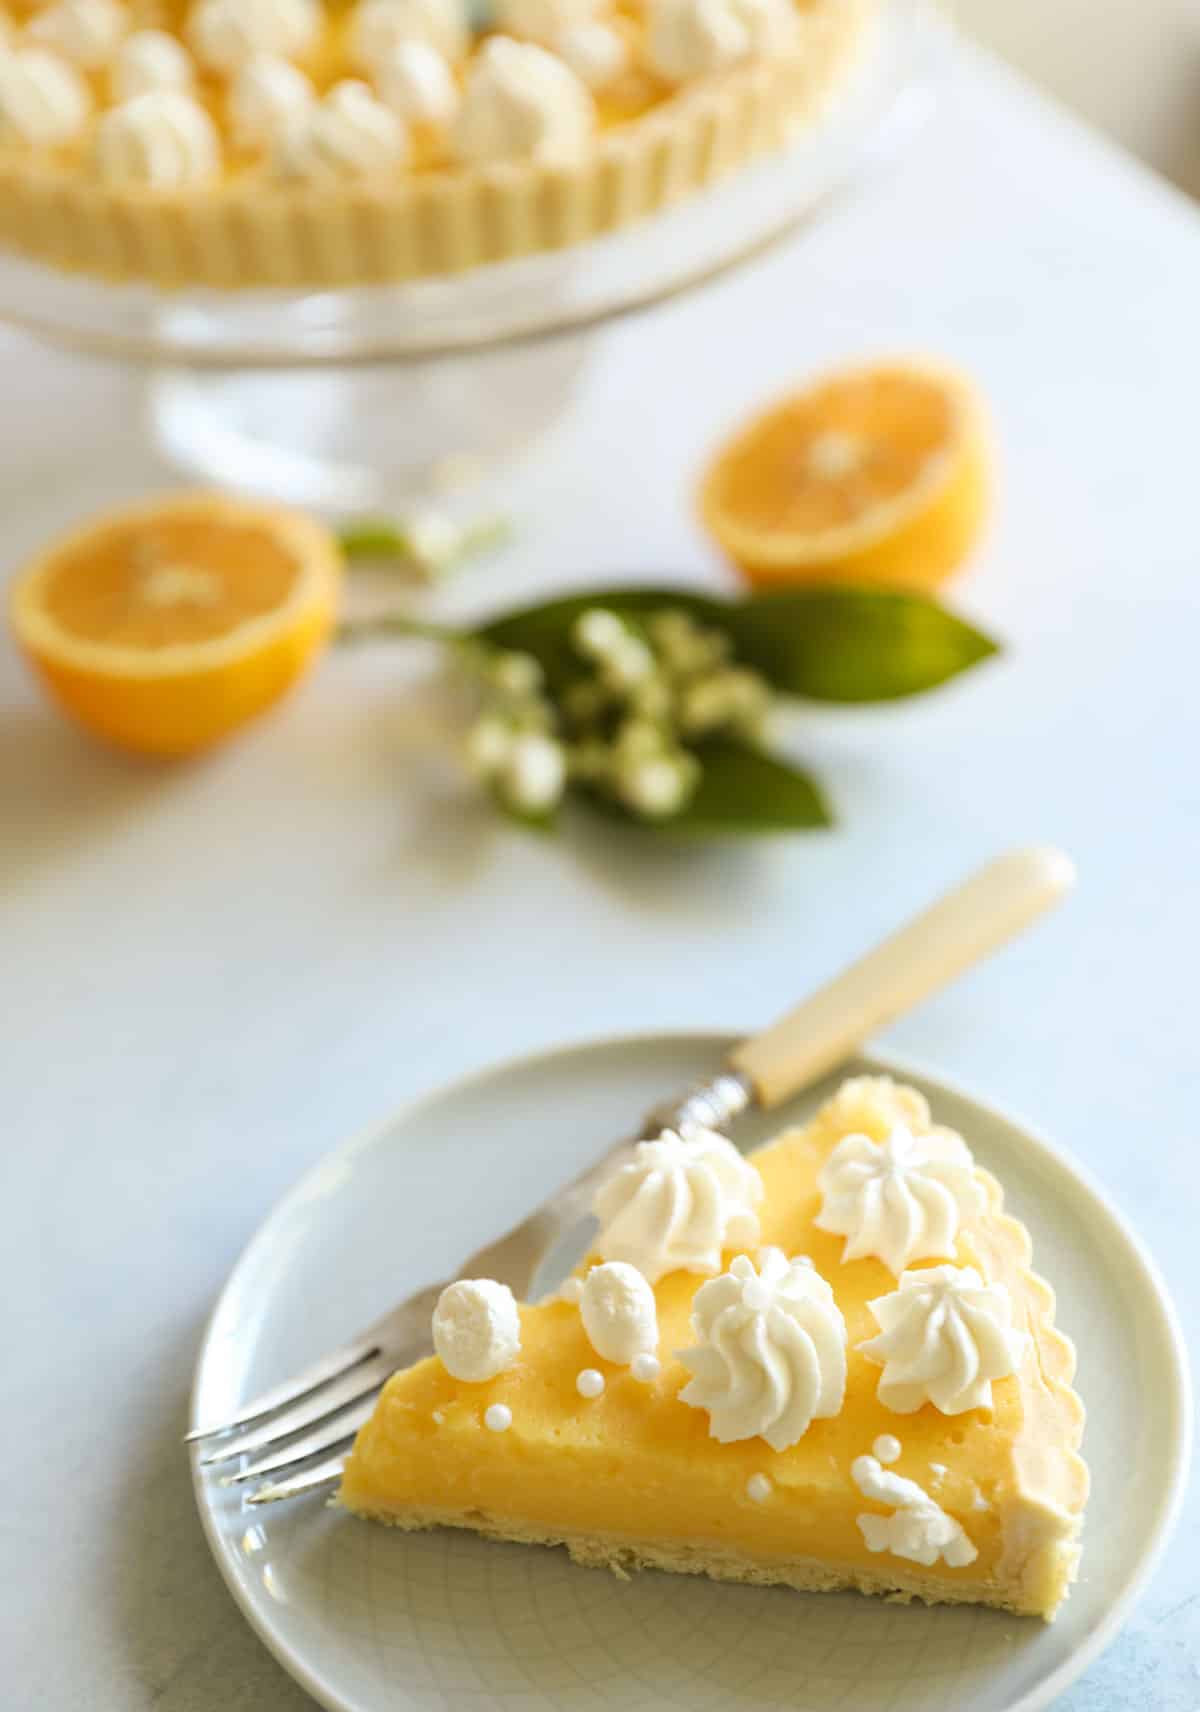 a slice of lemon pie with whipped cream and sliced lemons and citrus blossoms